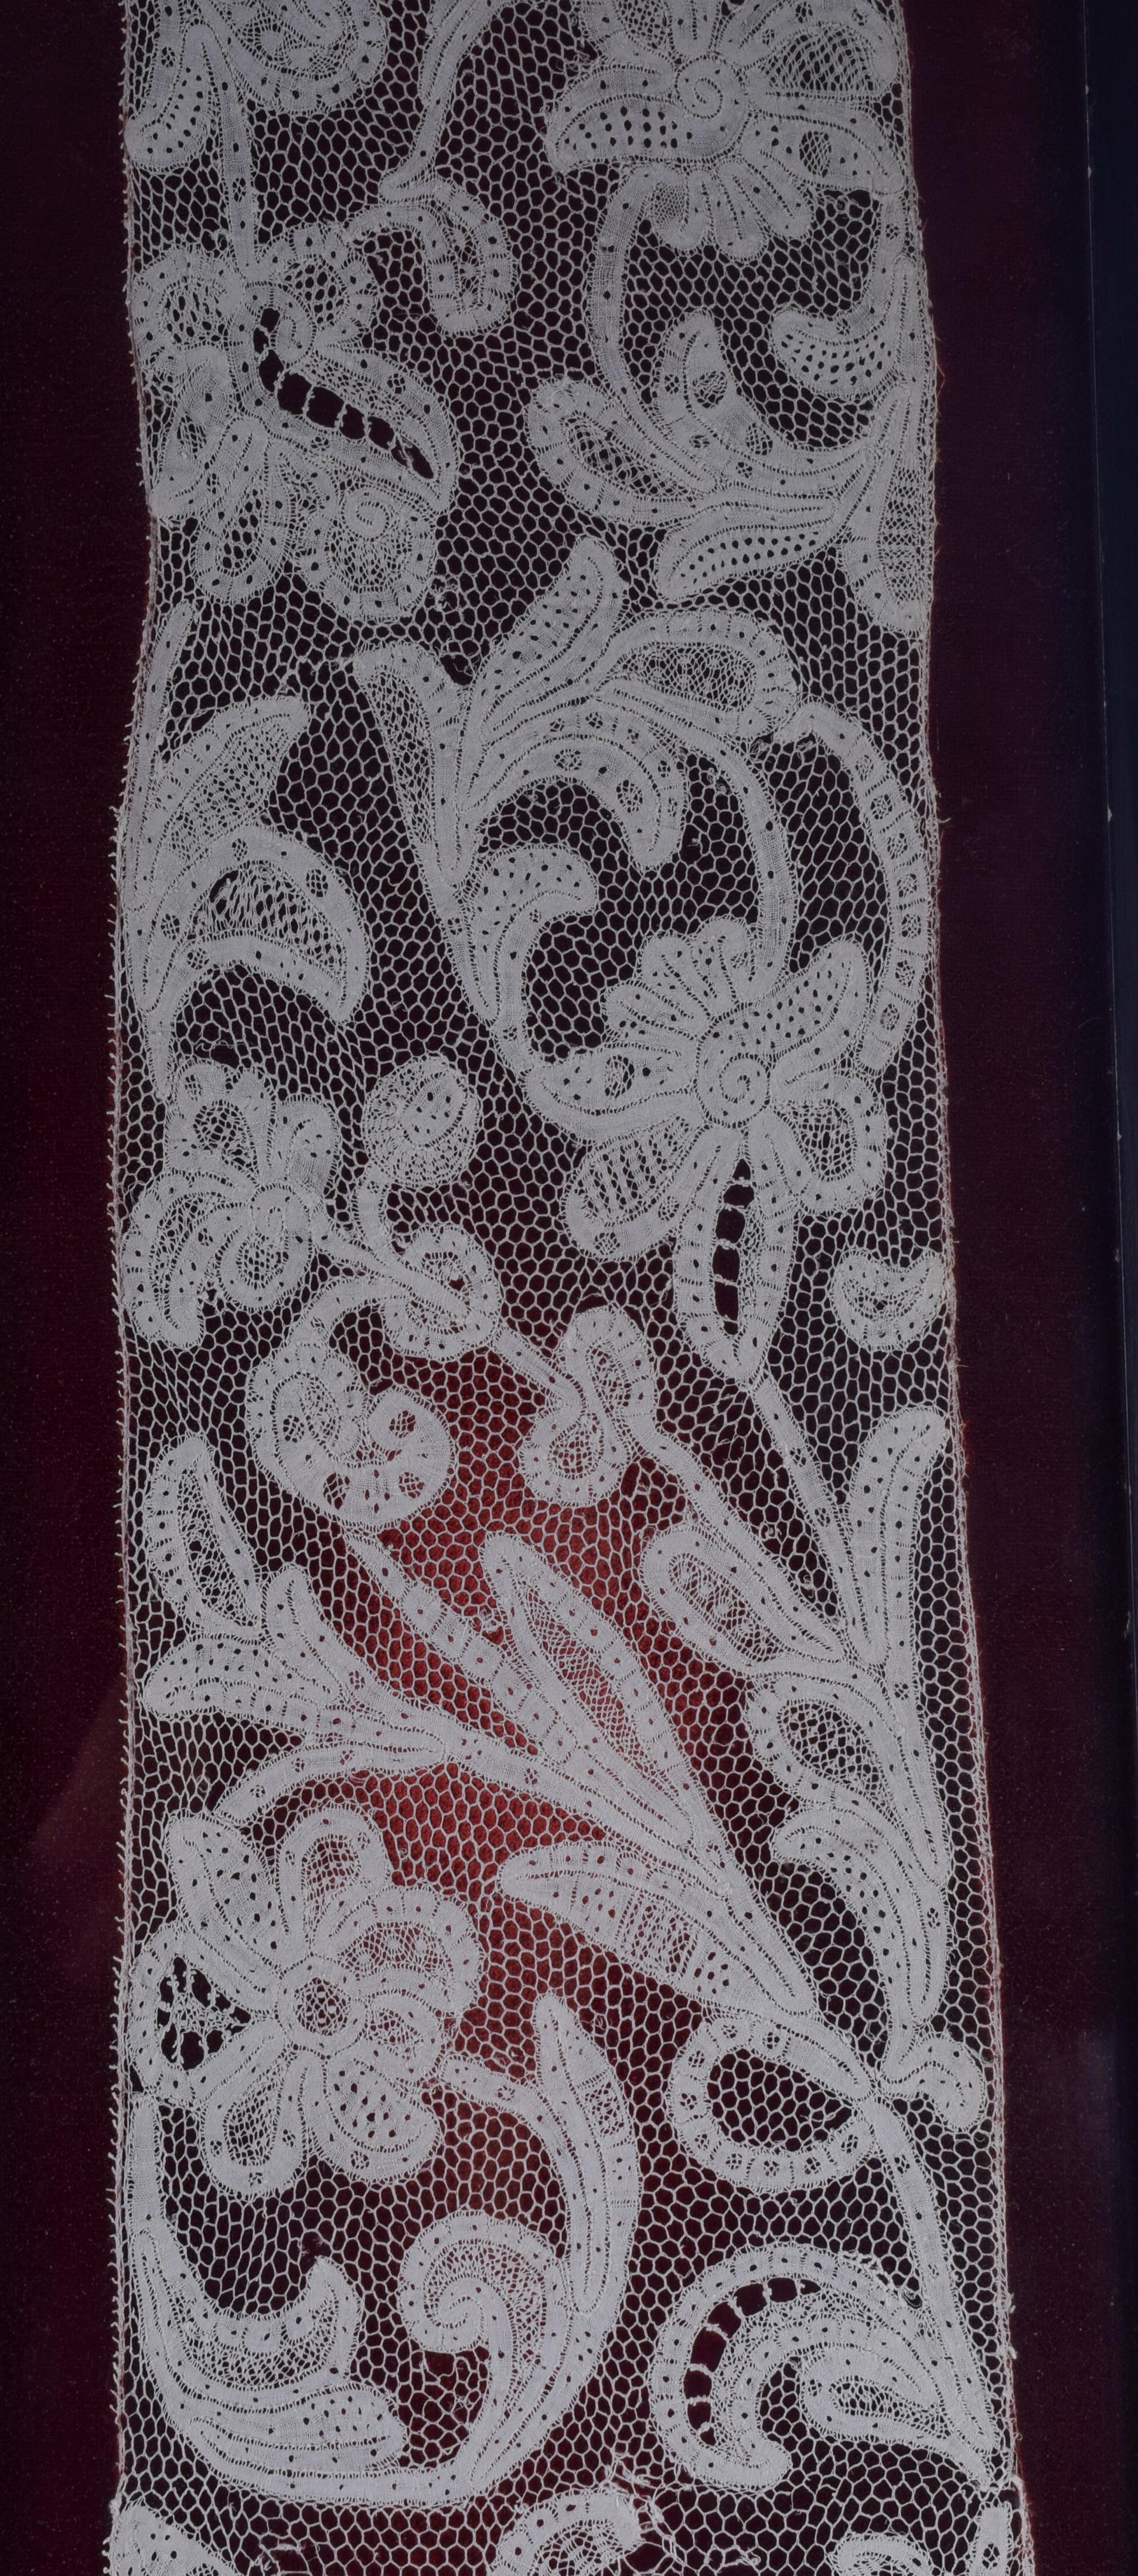 TWO 17TH CENTURY CONTINENTAL LACE PANELS. Largest 145 cm x 13 cm. (2) - Image 3 of 6